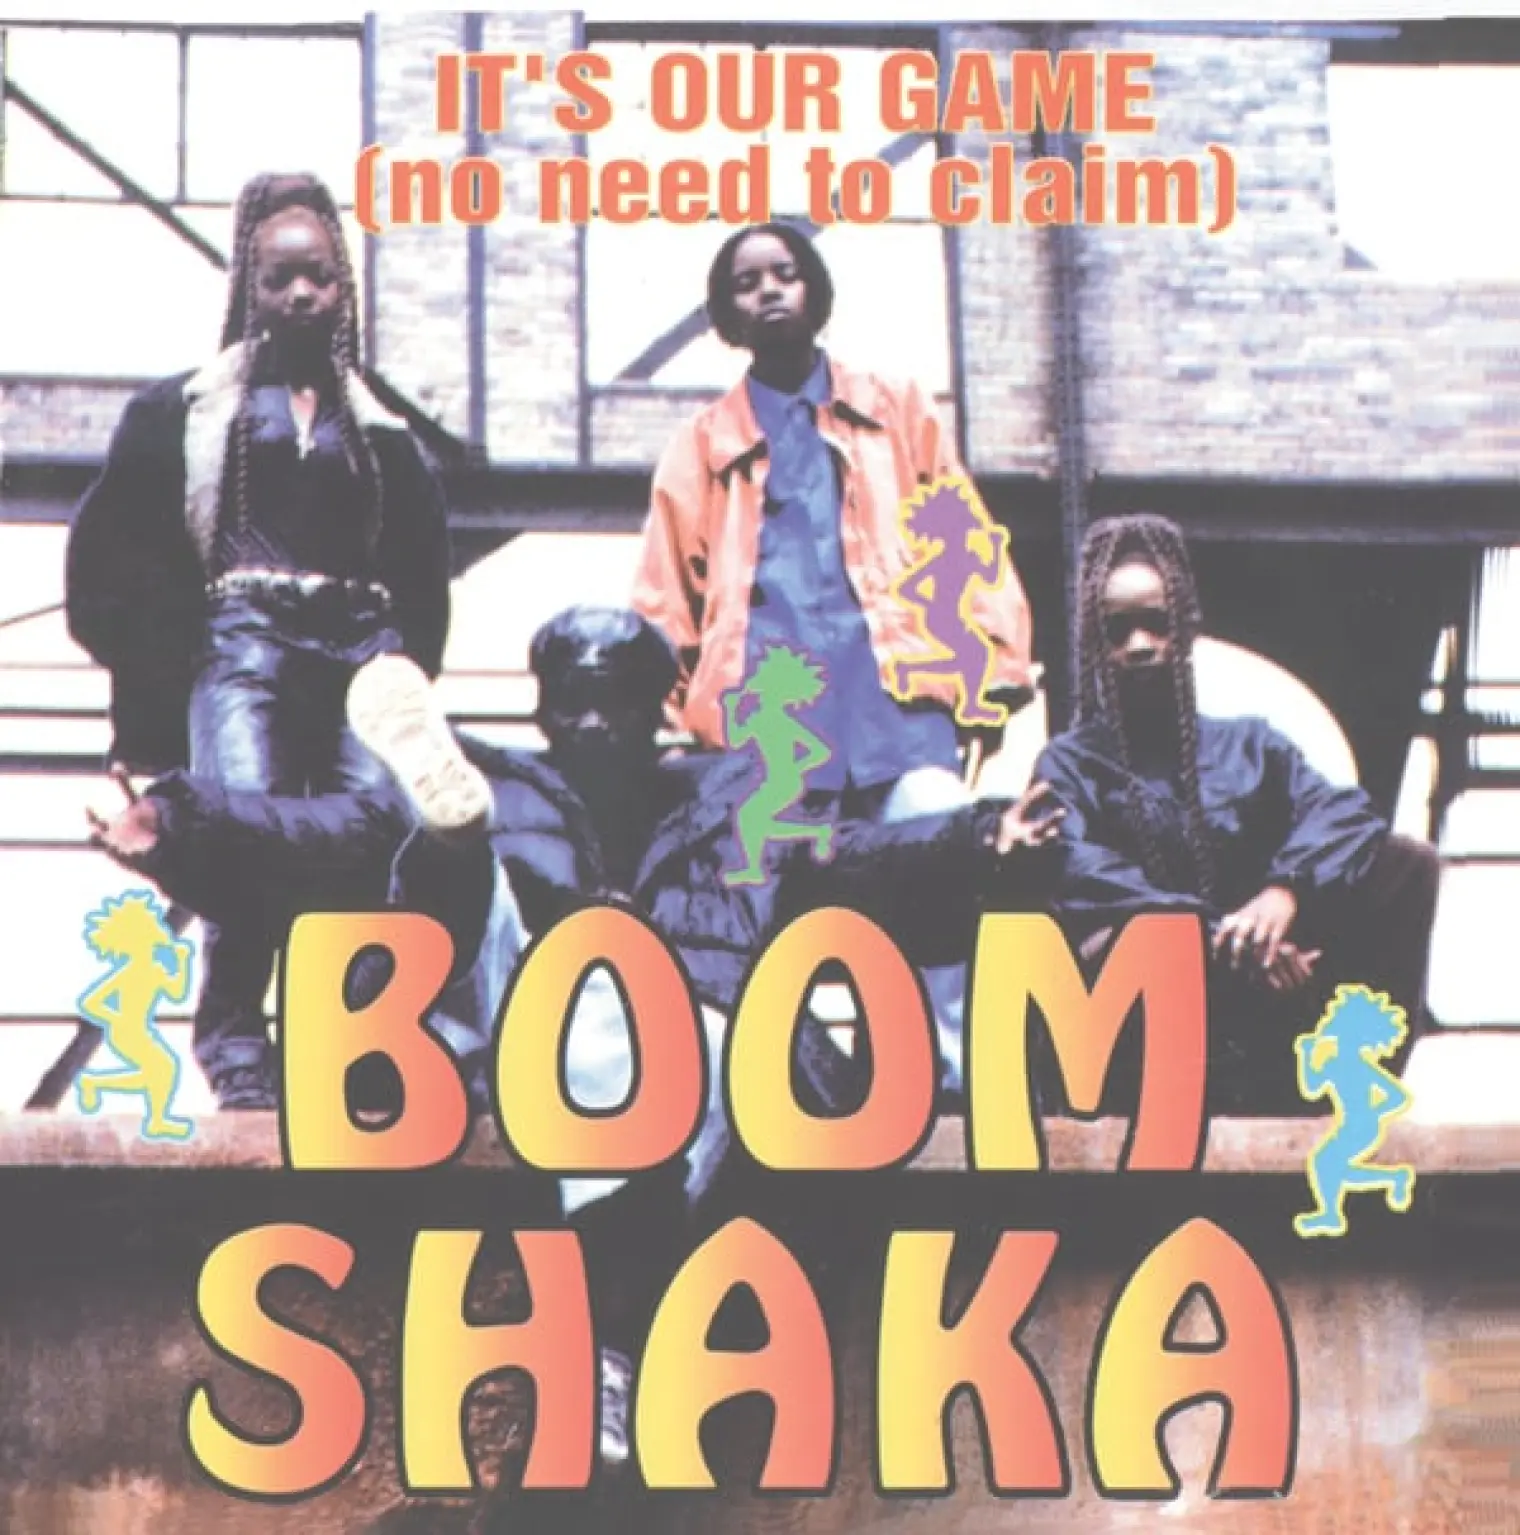 It's Our Game (no need to claim) -  Boom Shaka 